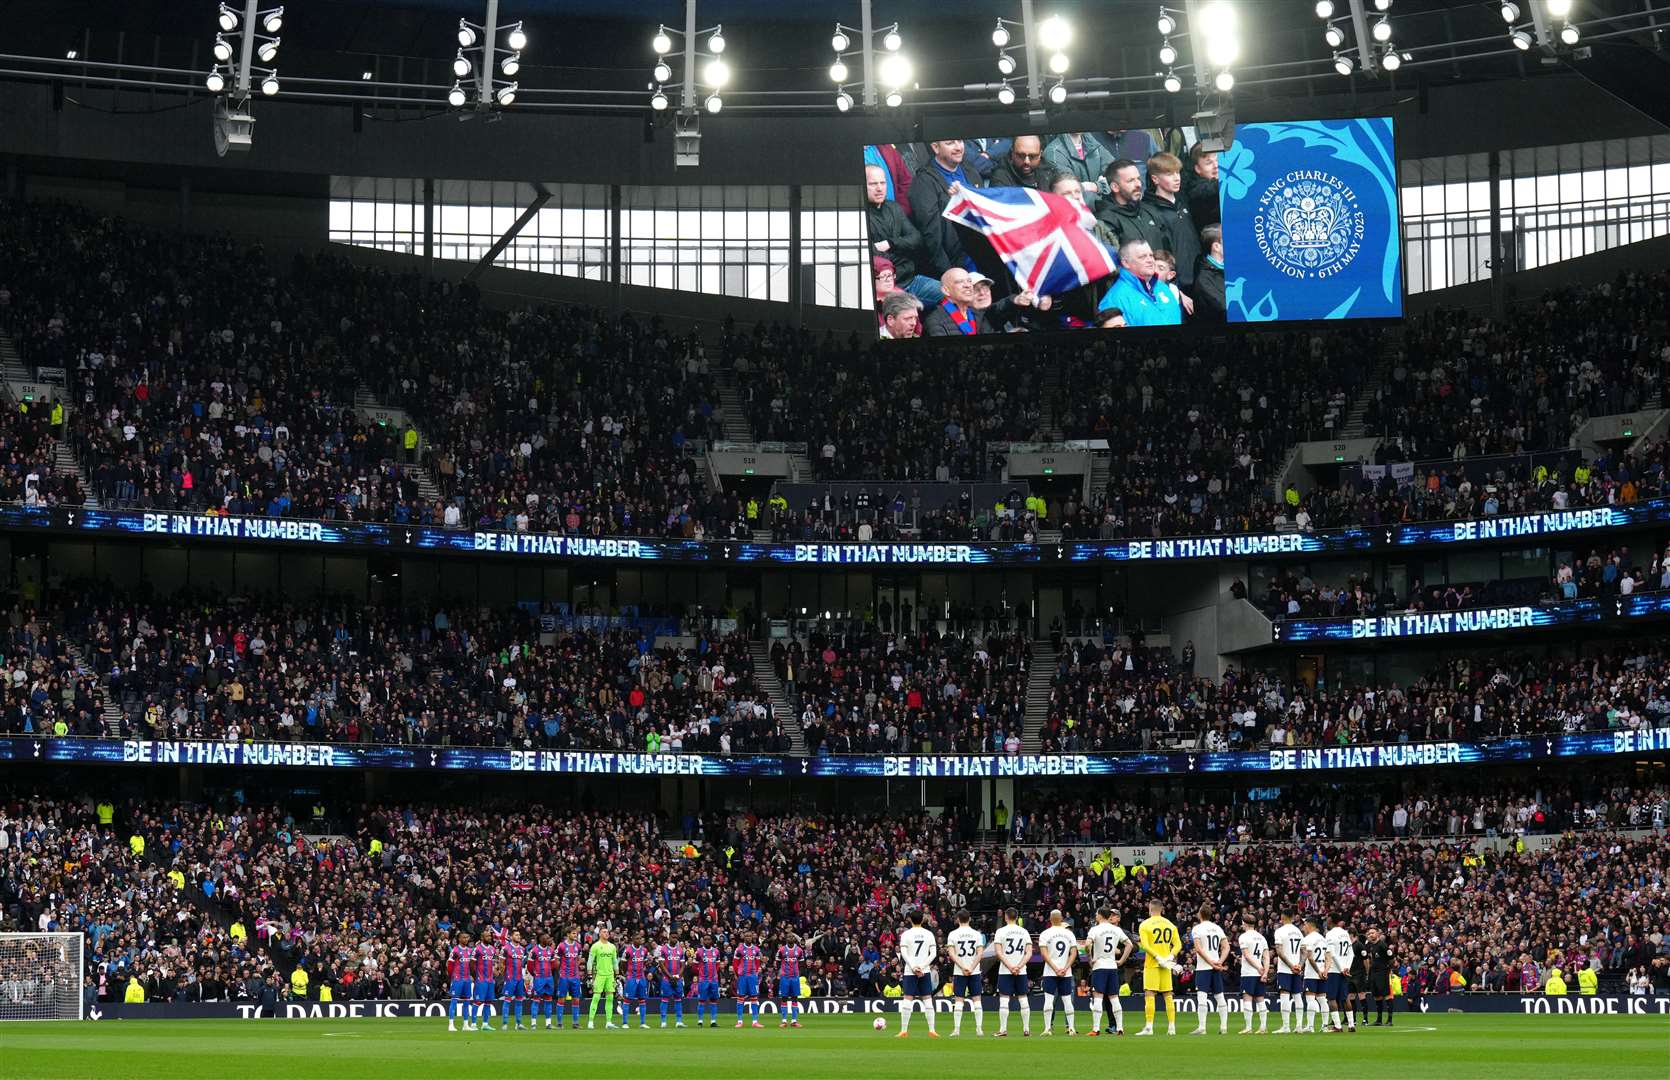 Tottenham Hotspur players stand for the national anthem, to mark the coronation of the King, before their Premier League match against Crystal Palace in London (John Walton/PA)